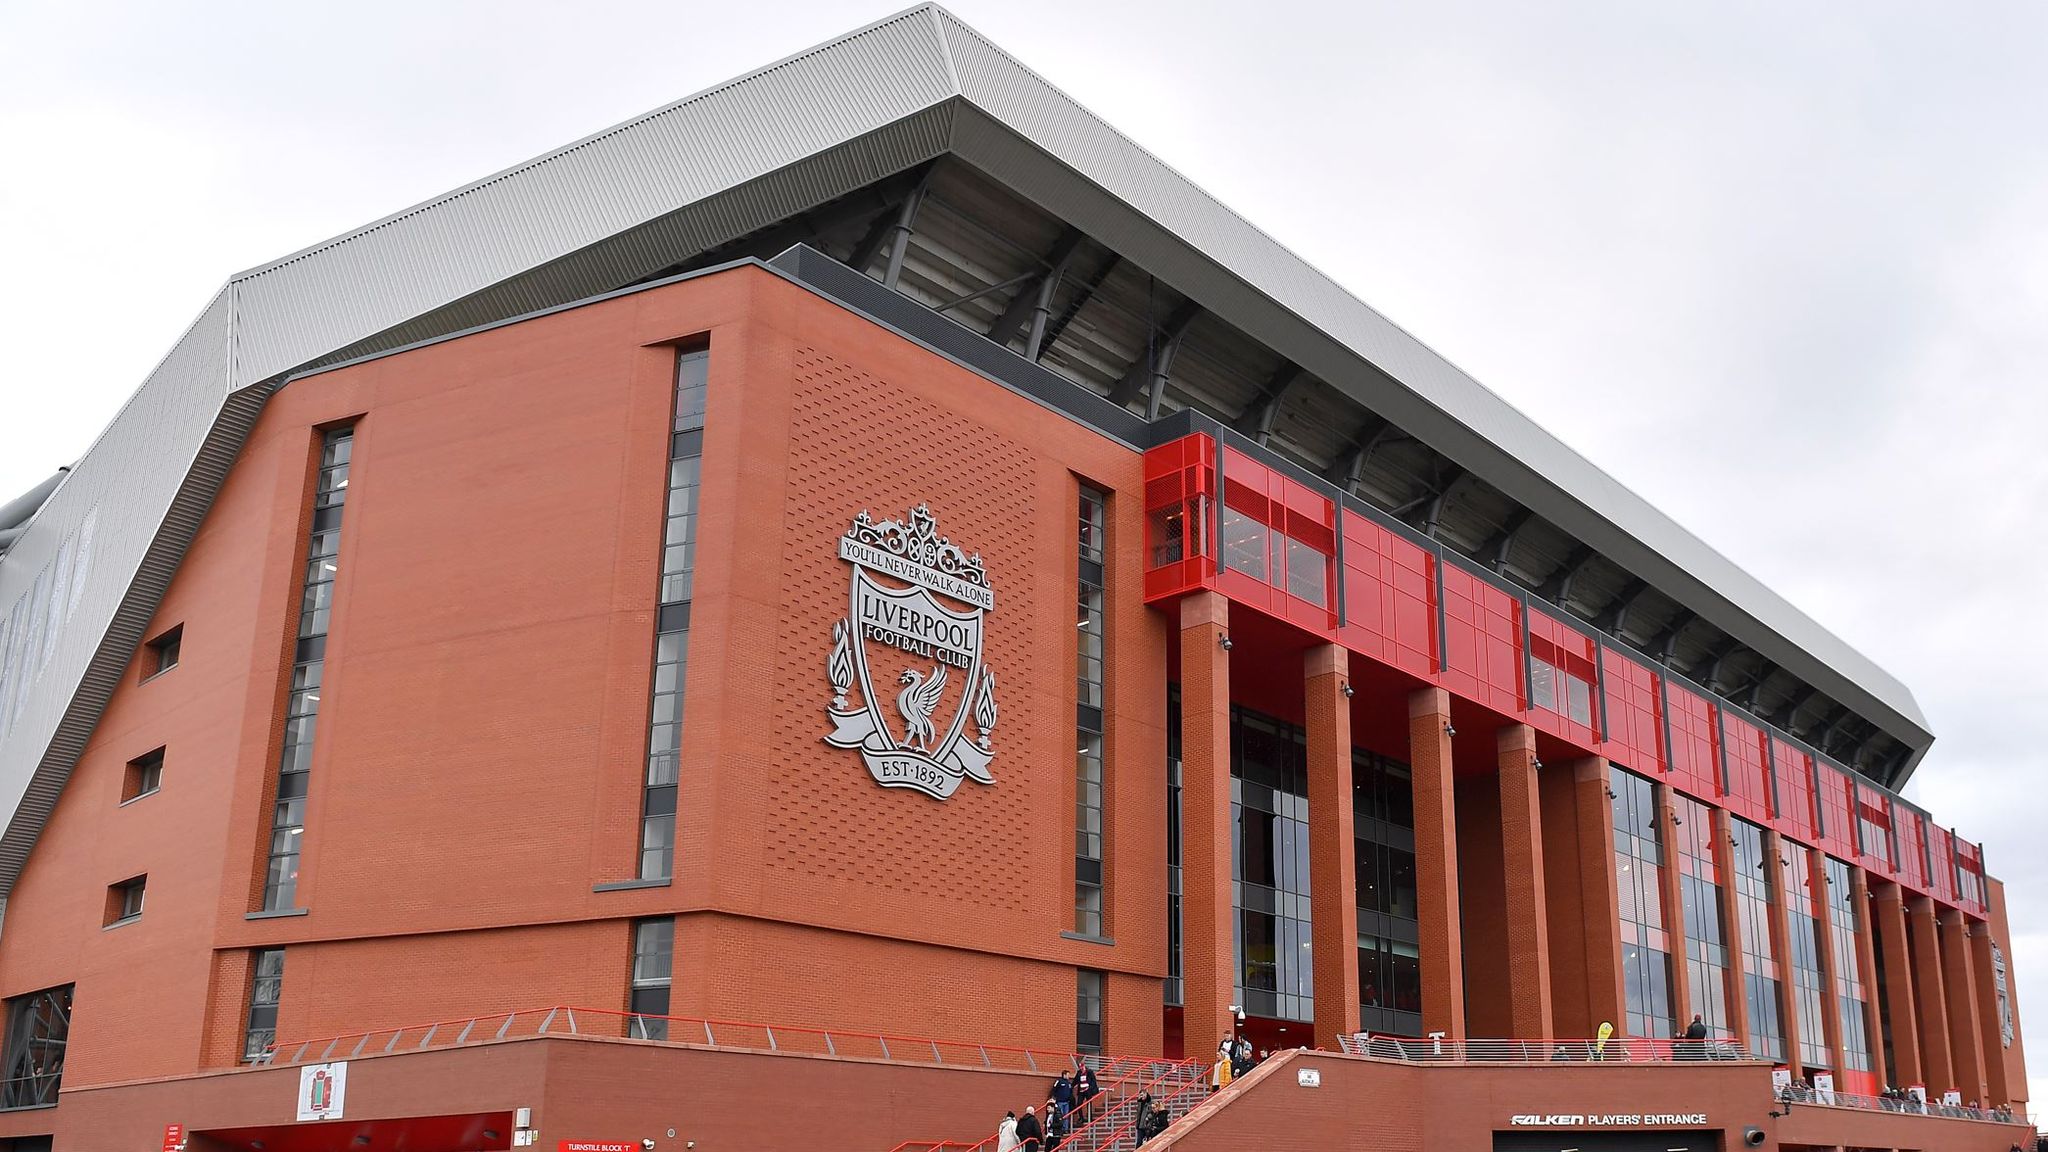 Liverpool owners Fenway Sports Group say they are open to offers, raising  prospect of club being sold, UK News